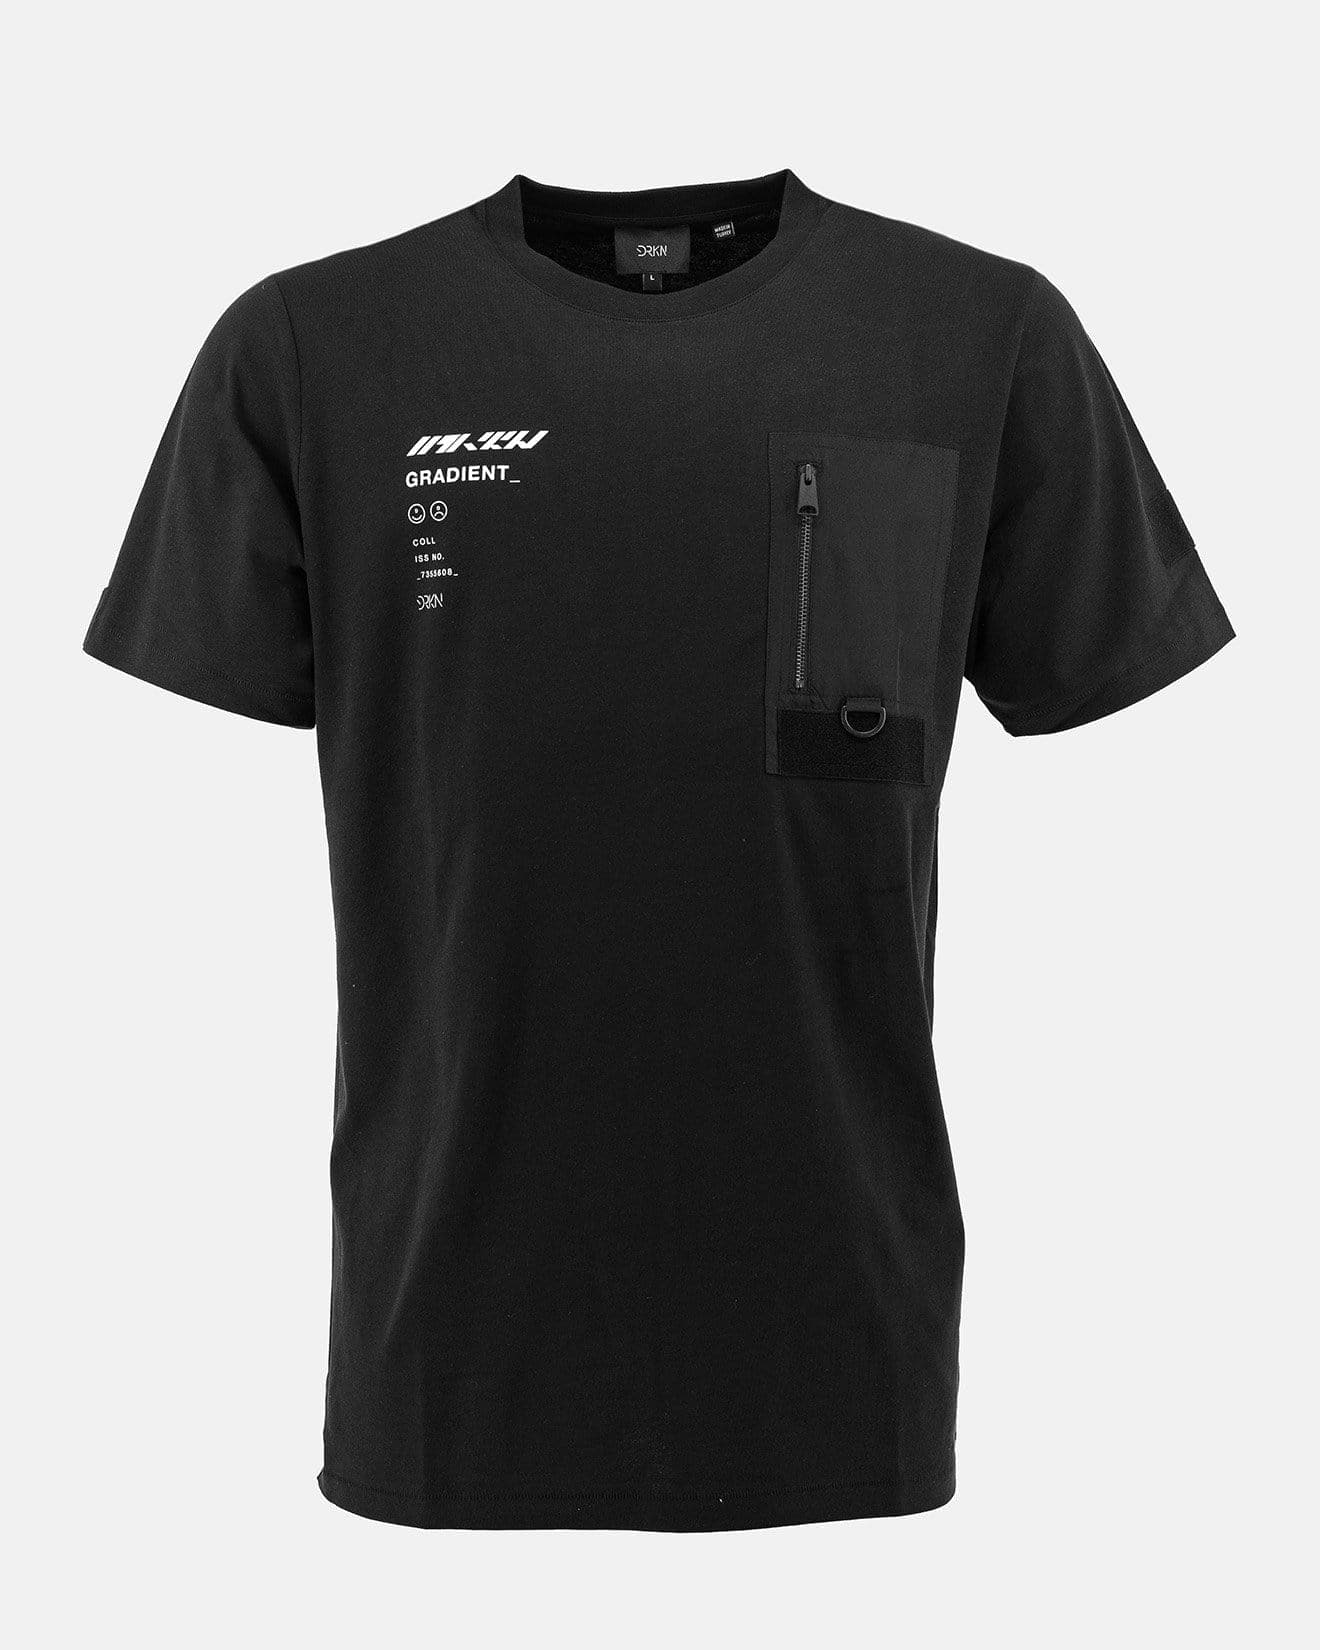 Black Tee with a discreet text print on the right side of the chest. Pocket with a zipper on the left side of the chest.